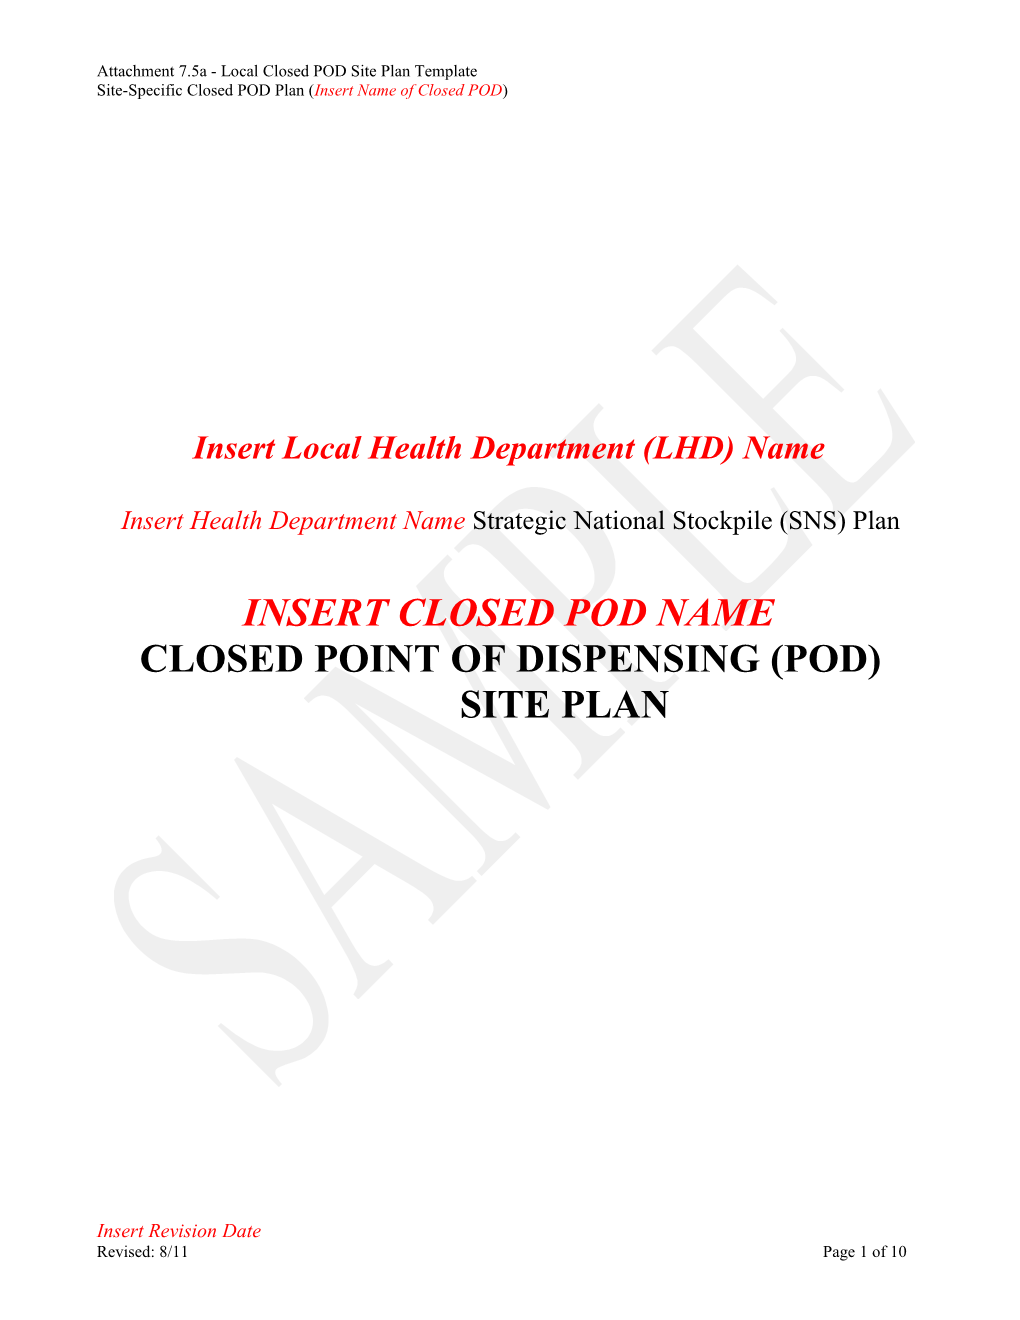 Point of Dispensing (POD) Site Plan - Template